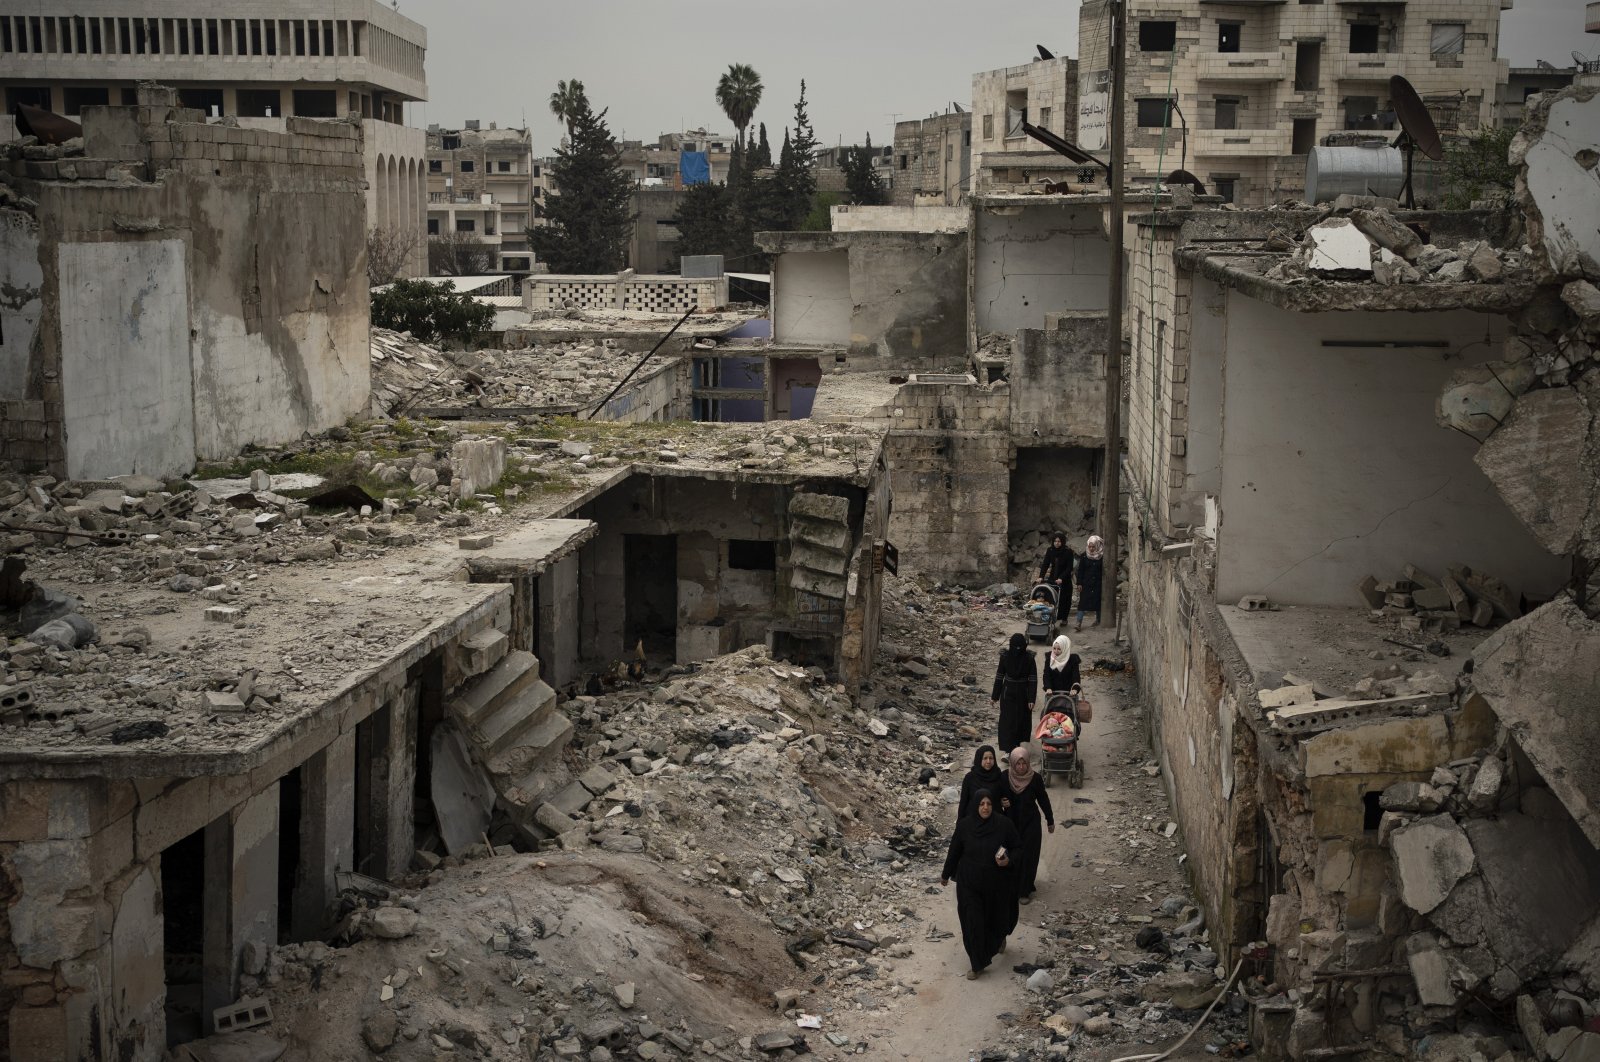 Women walk in a neighborhood heavily damaged by airstrikes in Idlib, Syria, March 12, 2020. (AP Photo)